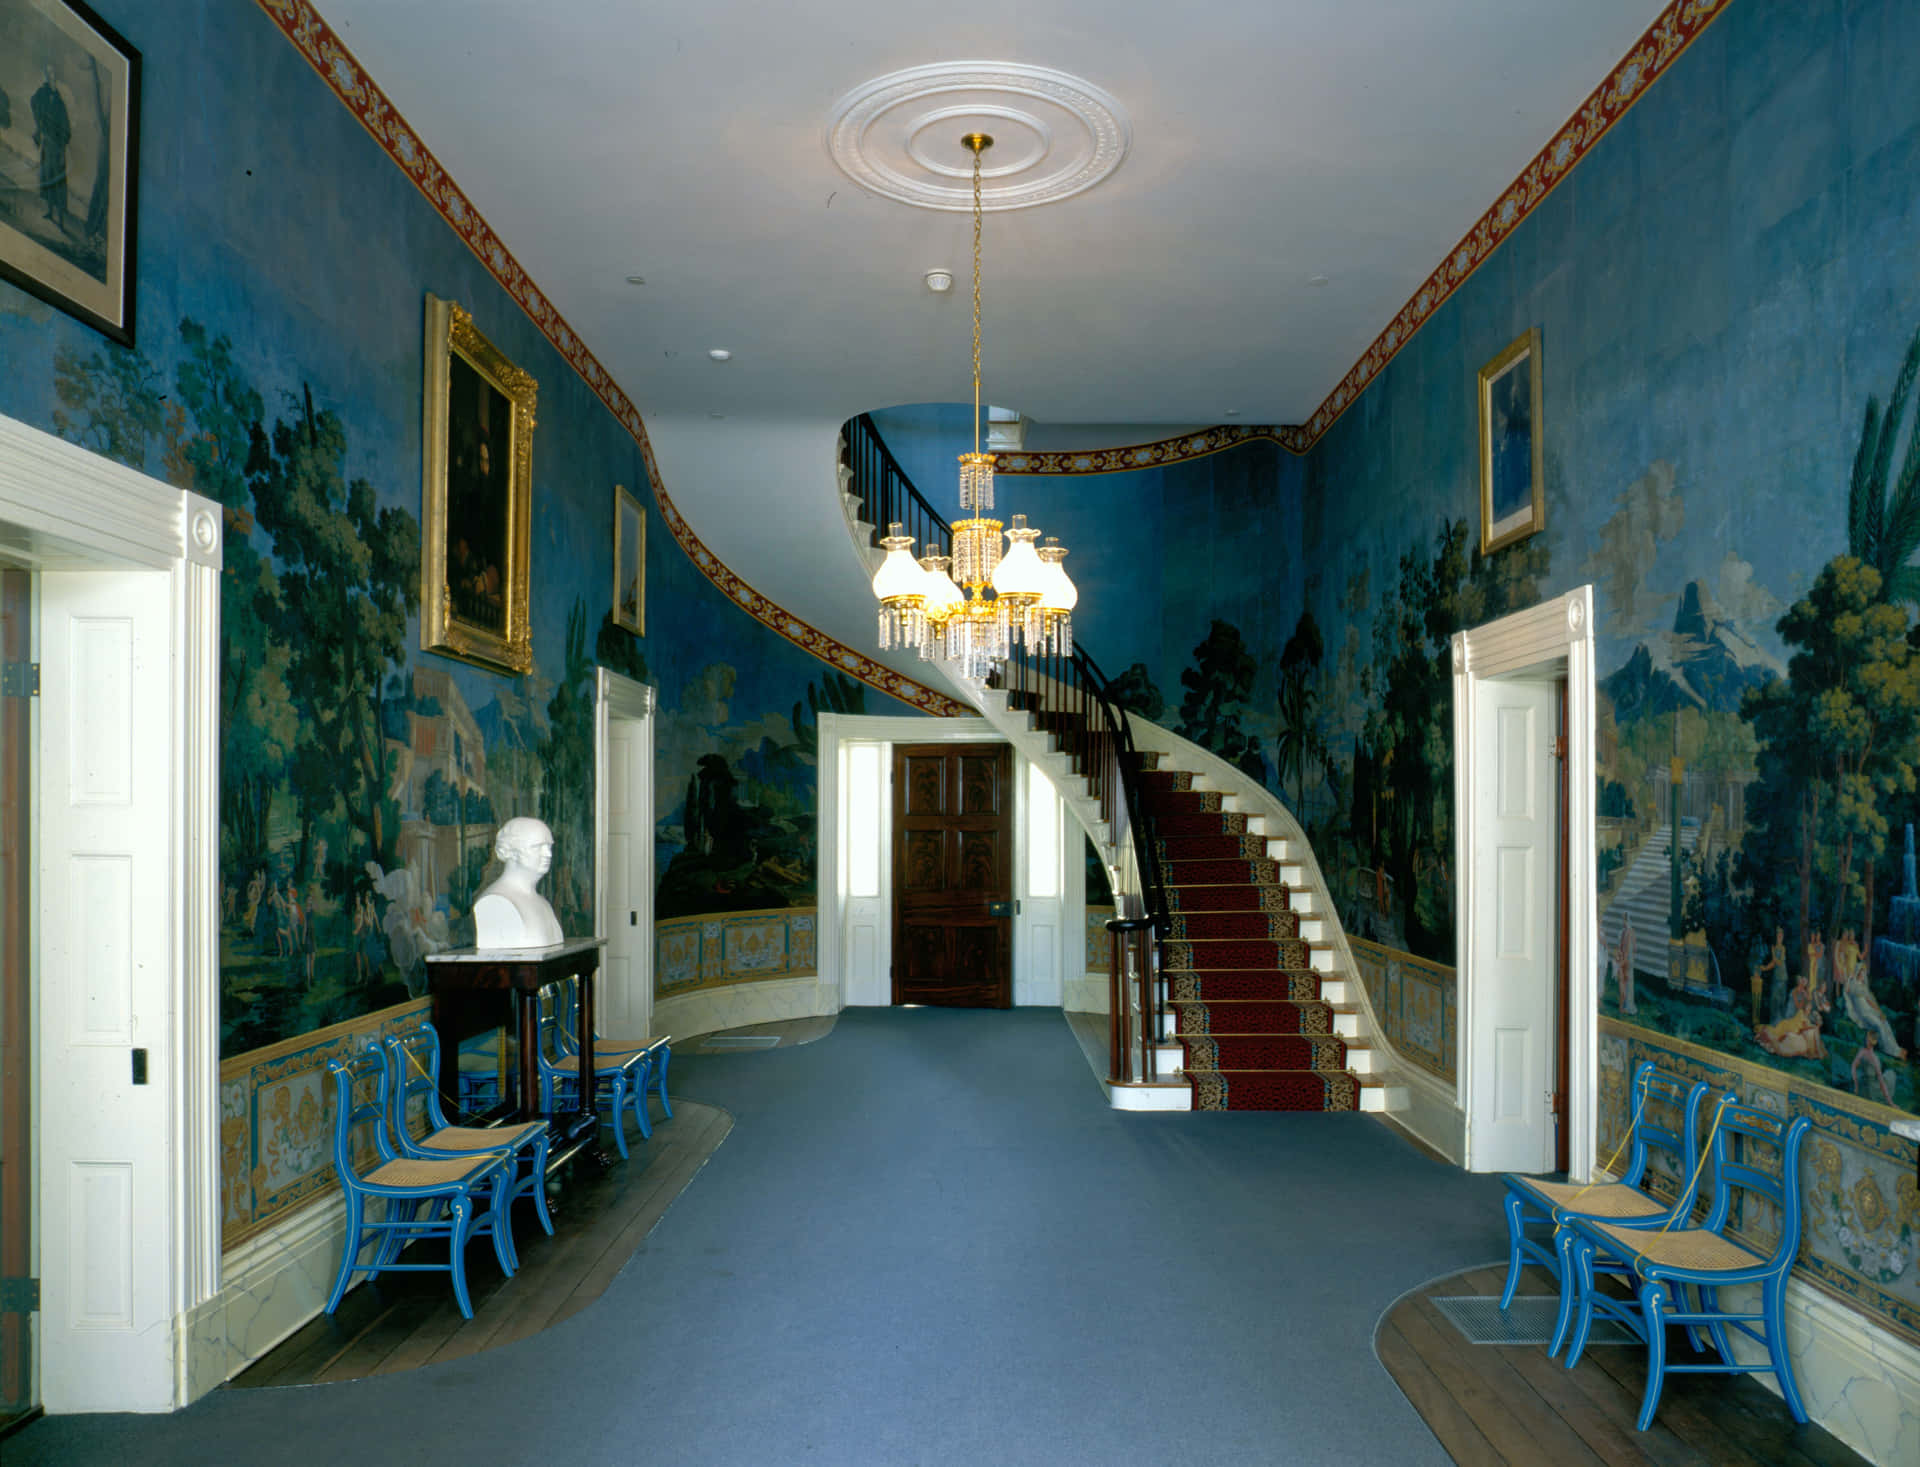 Majestic Hallway of The Hermitage Museum Wallpaper